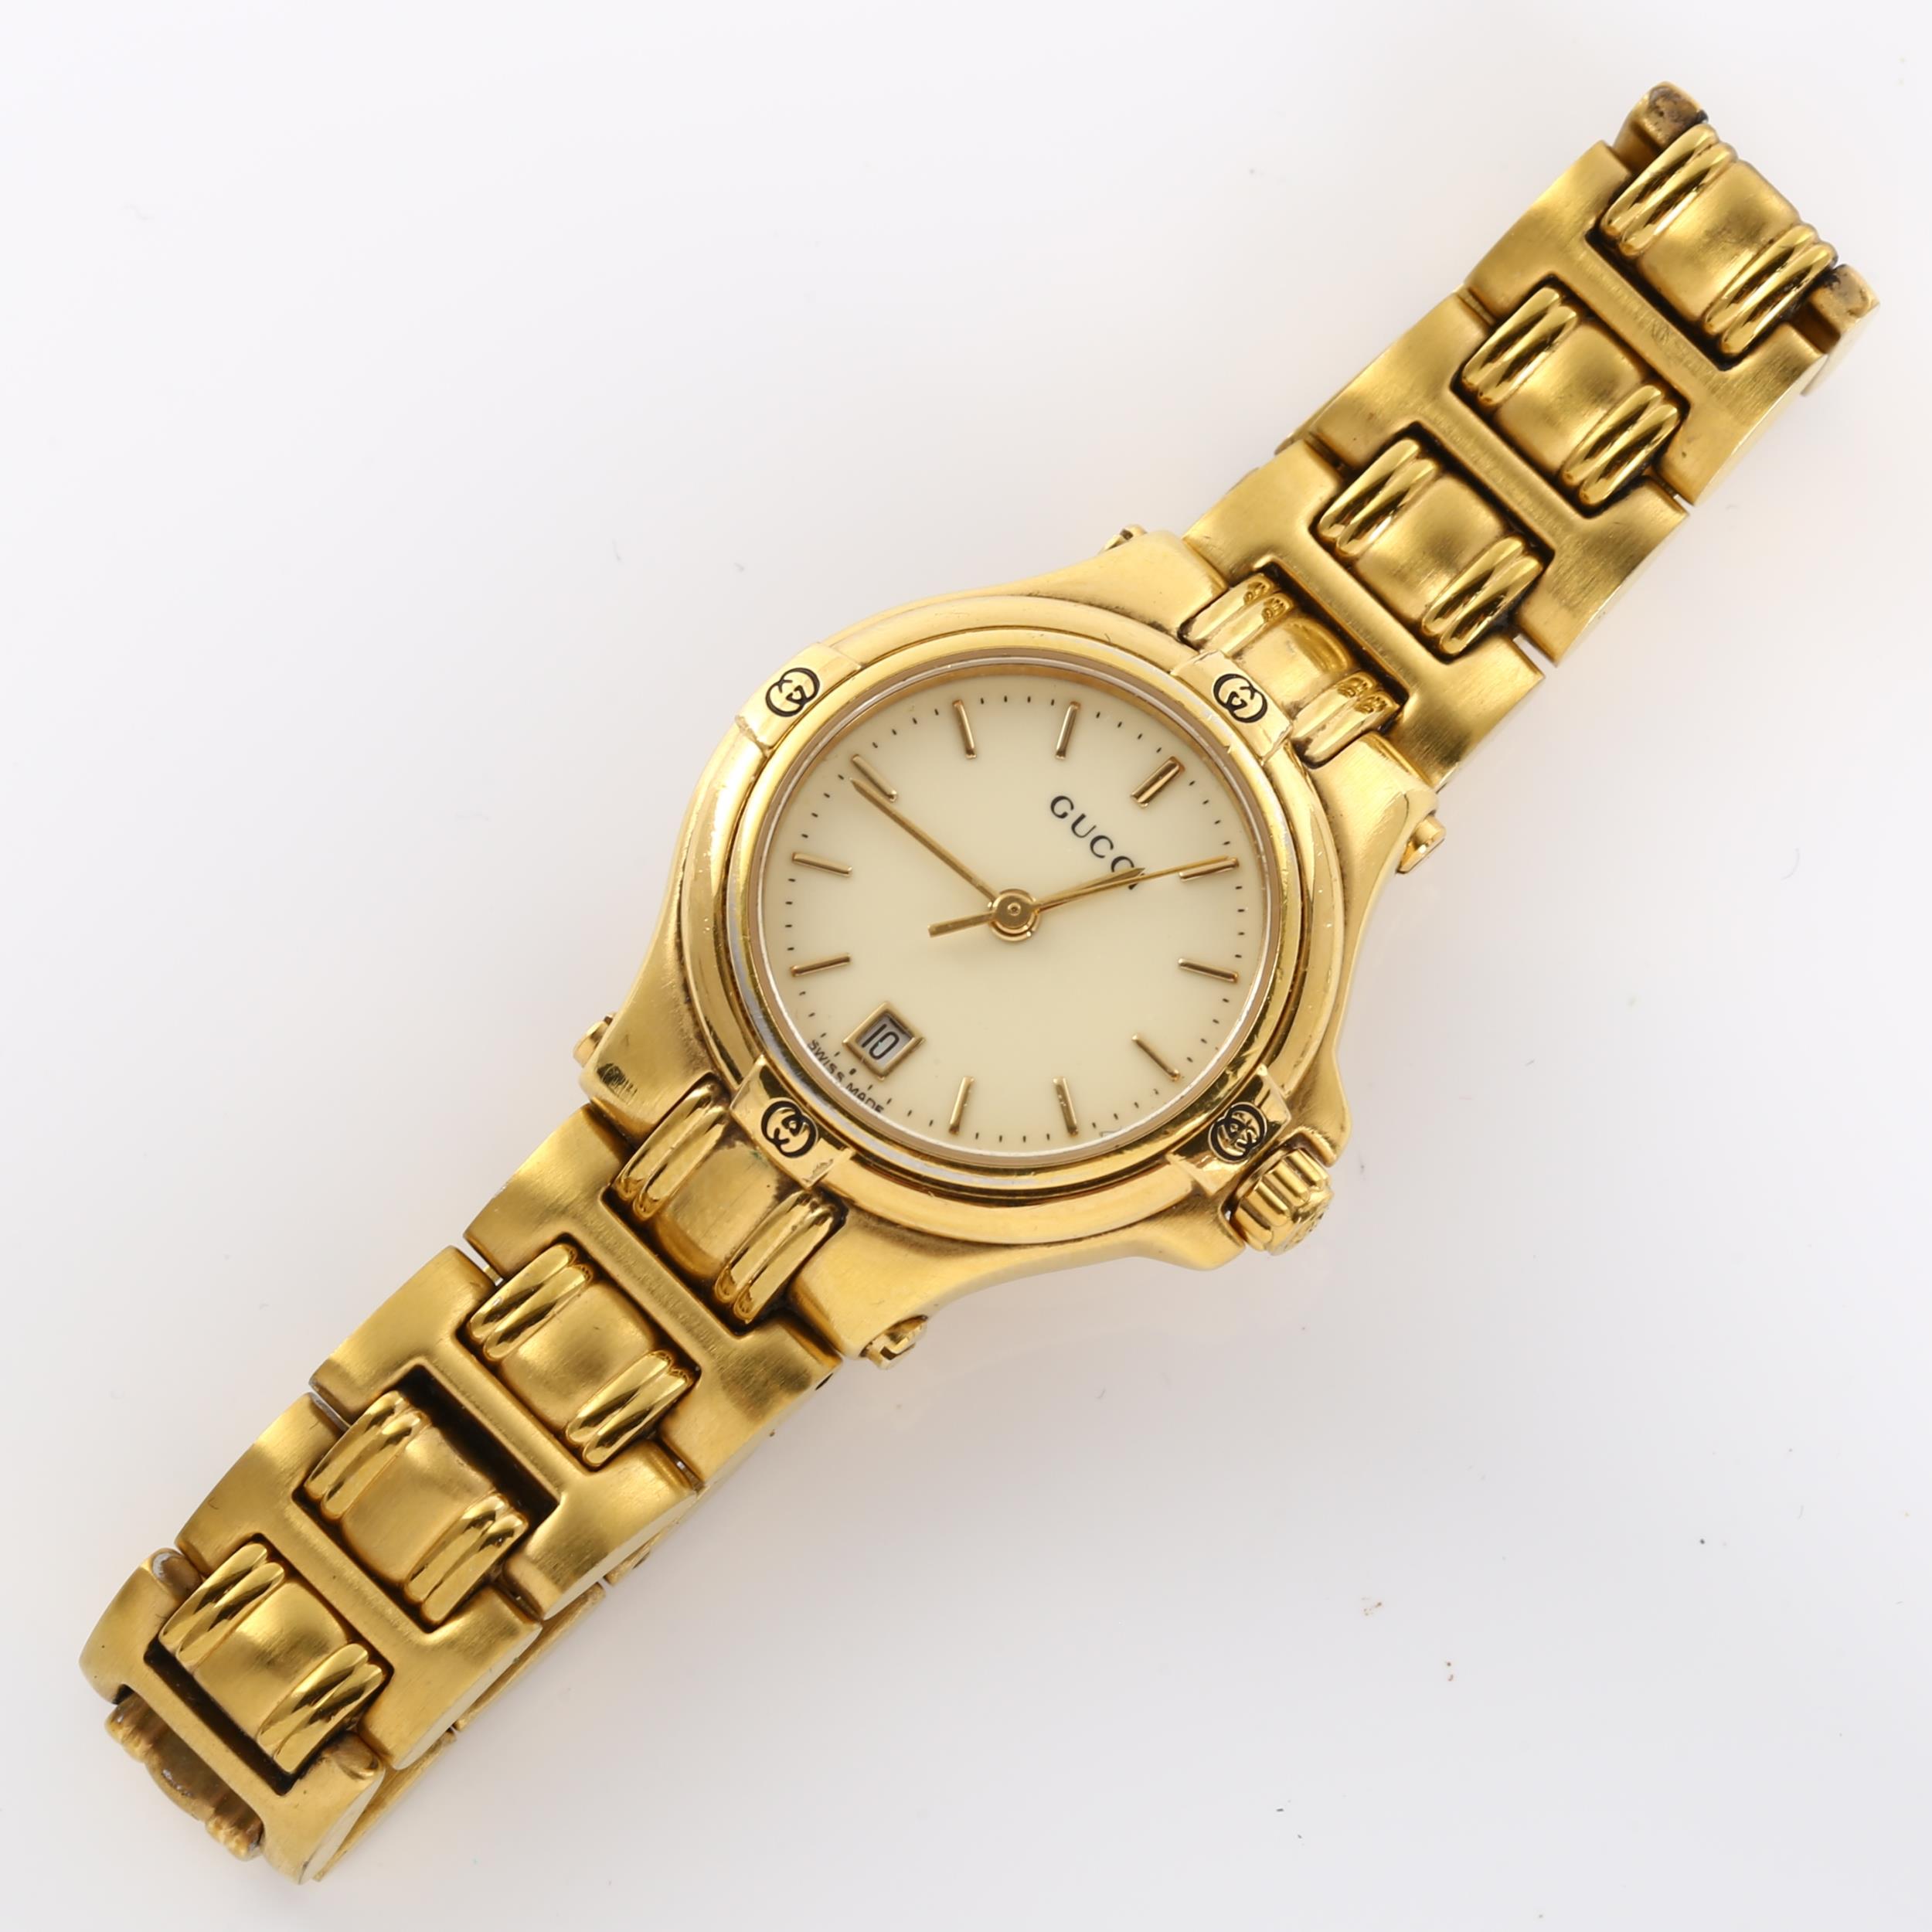 GUCCI - a lady's gold plated 9240L quartz bracelet watch, cream dial with gilded baton hour markers, - Image 2 of 5